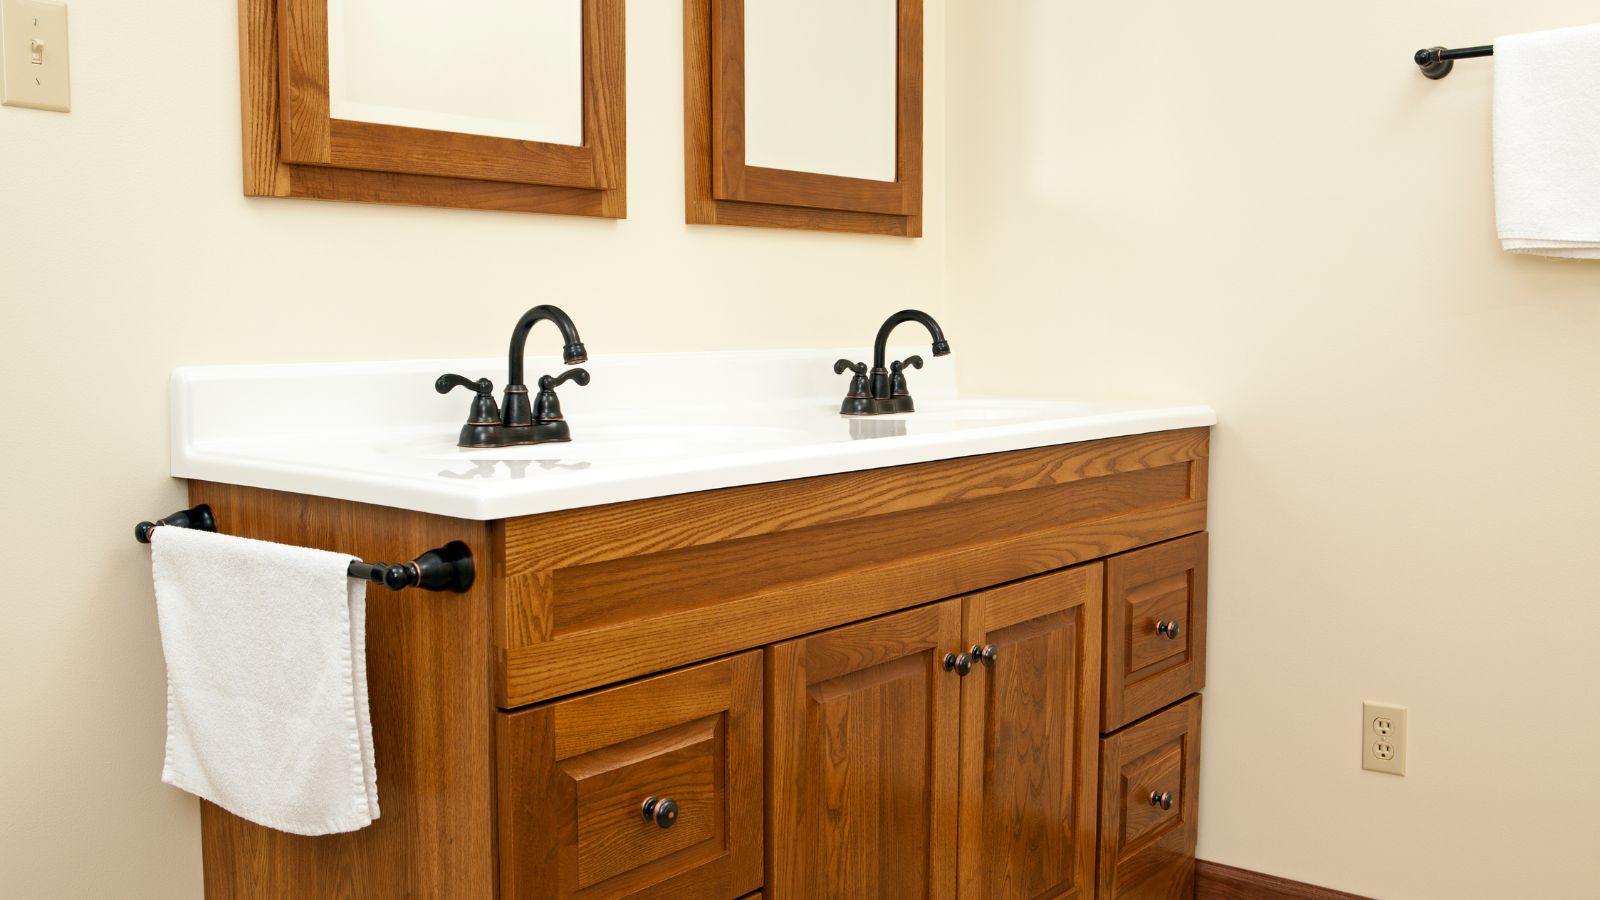 Save Space in Your Bathroom with a Wall-Mounted Double Vanity
